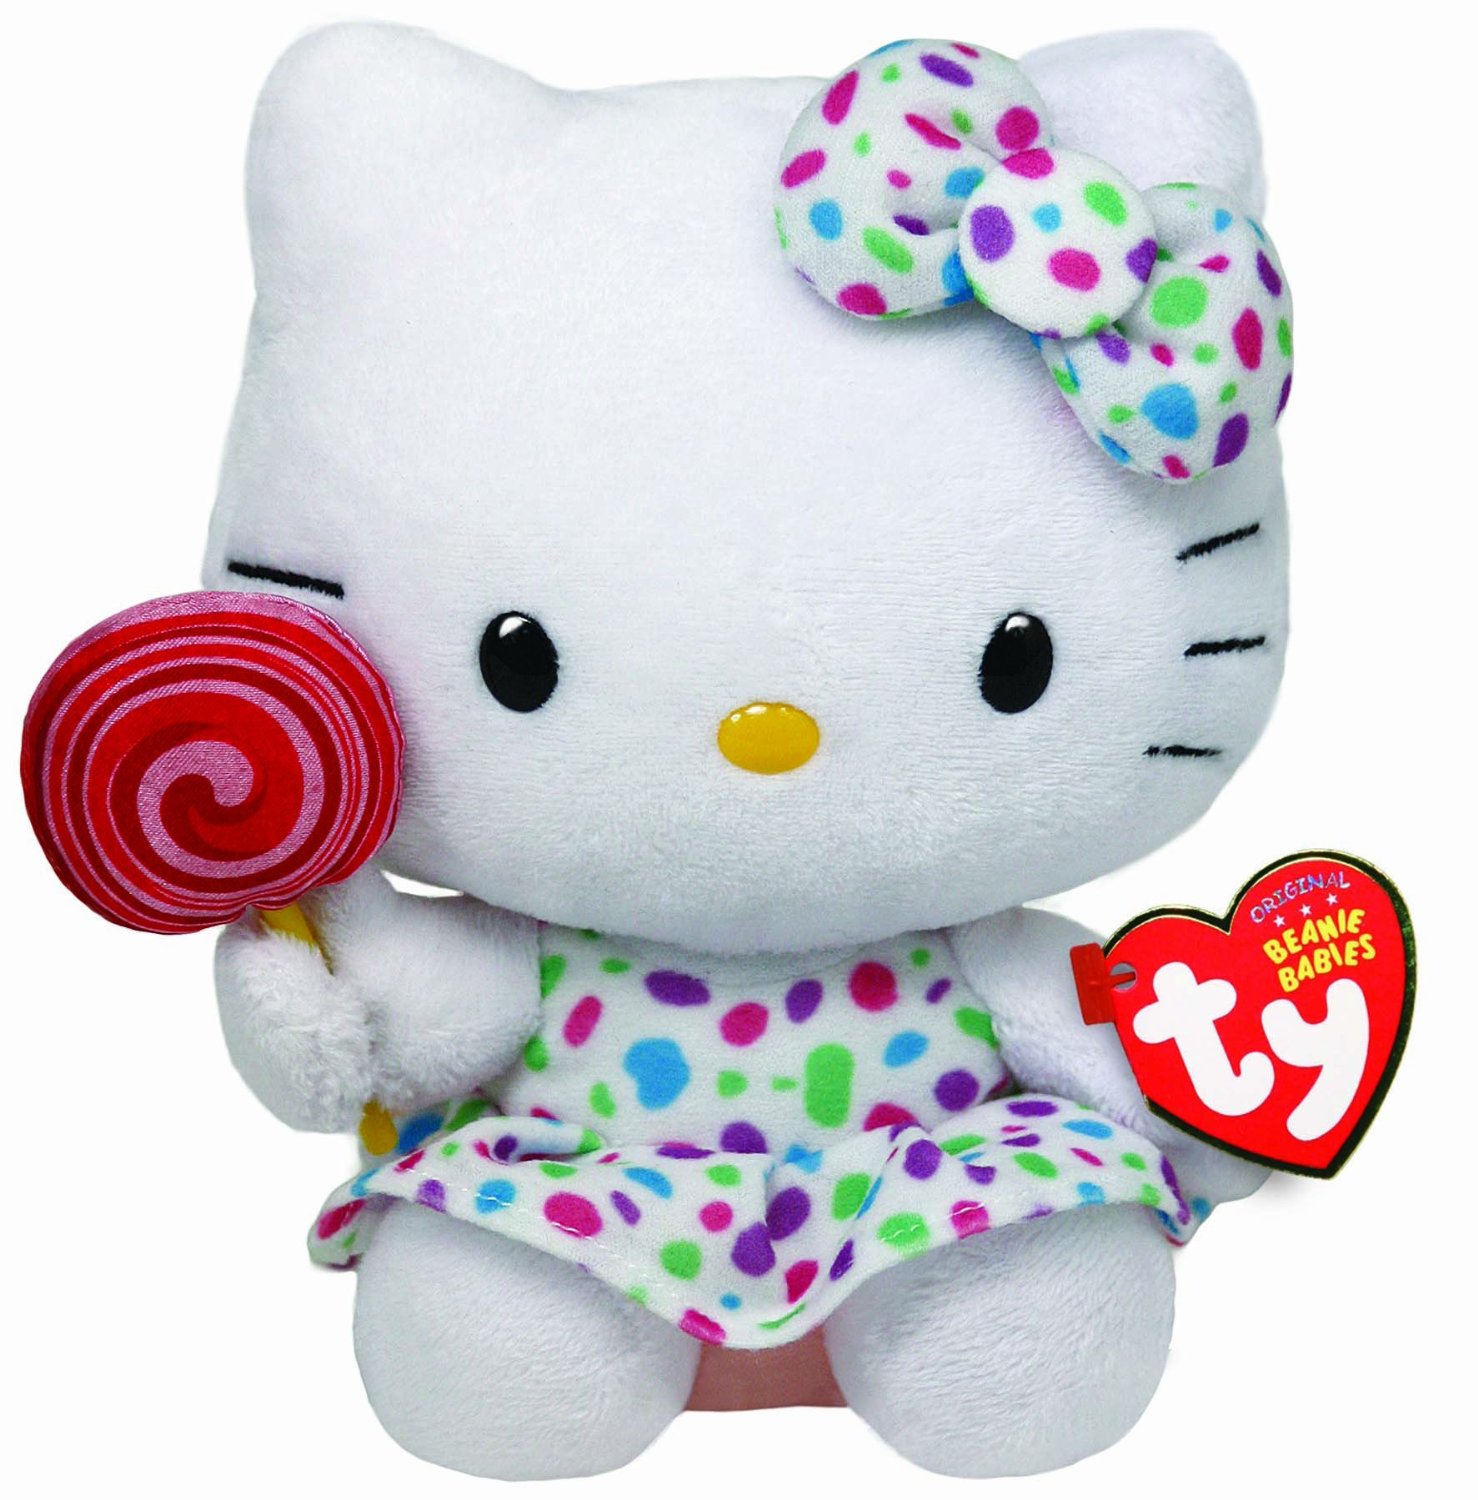 Hello Kitty Items for $15.00 or Less